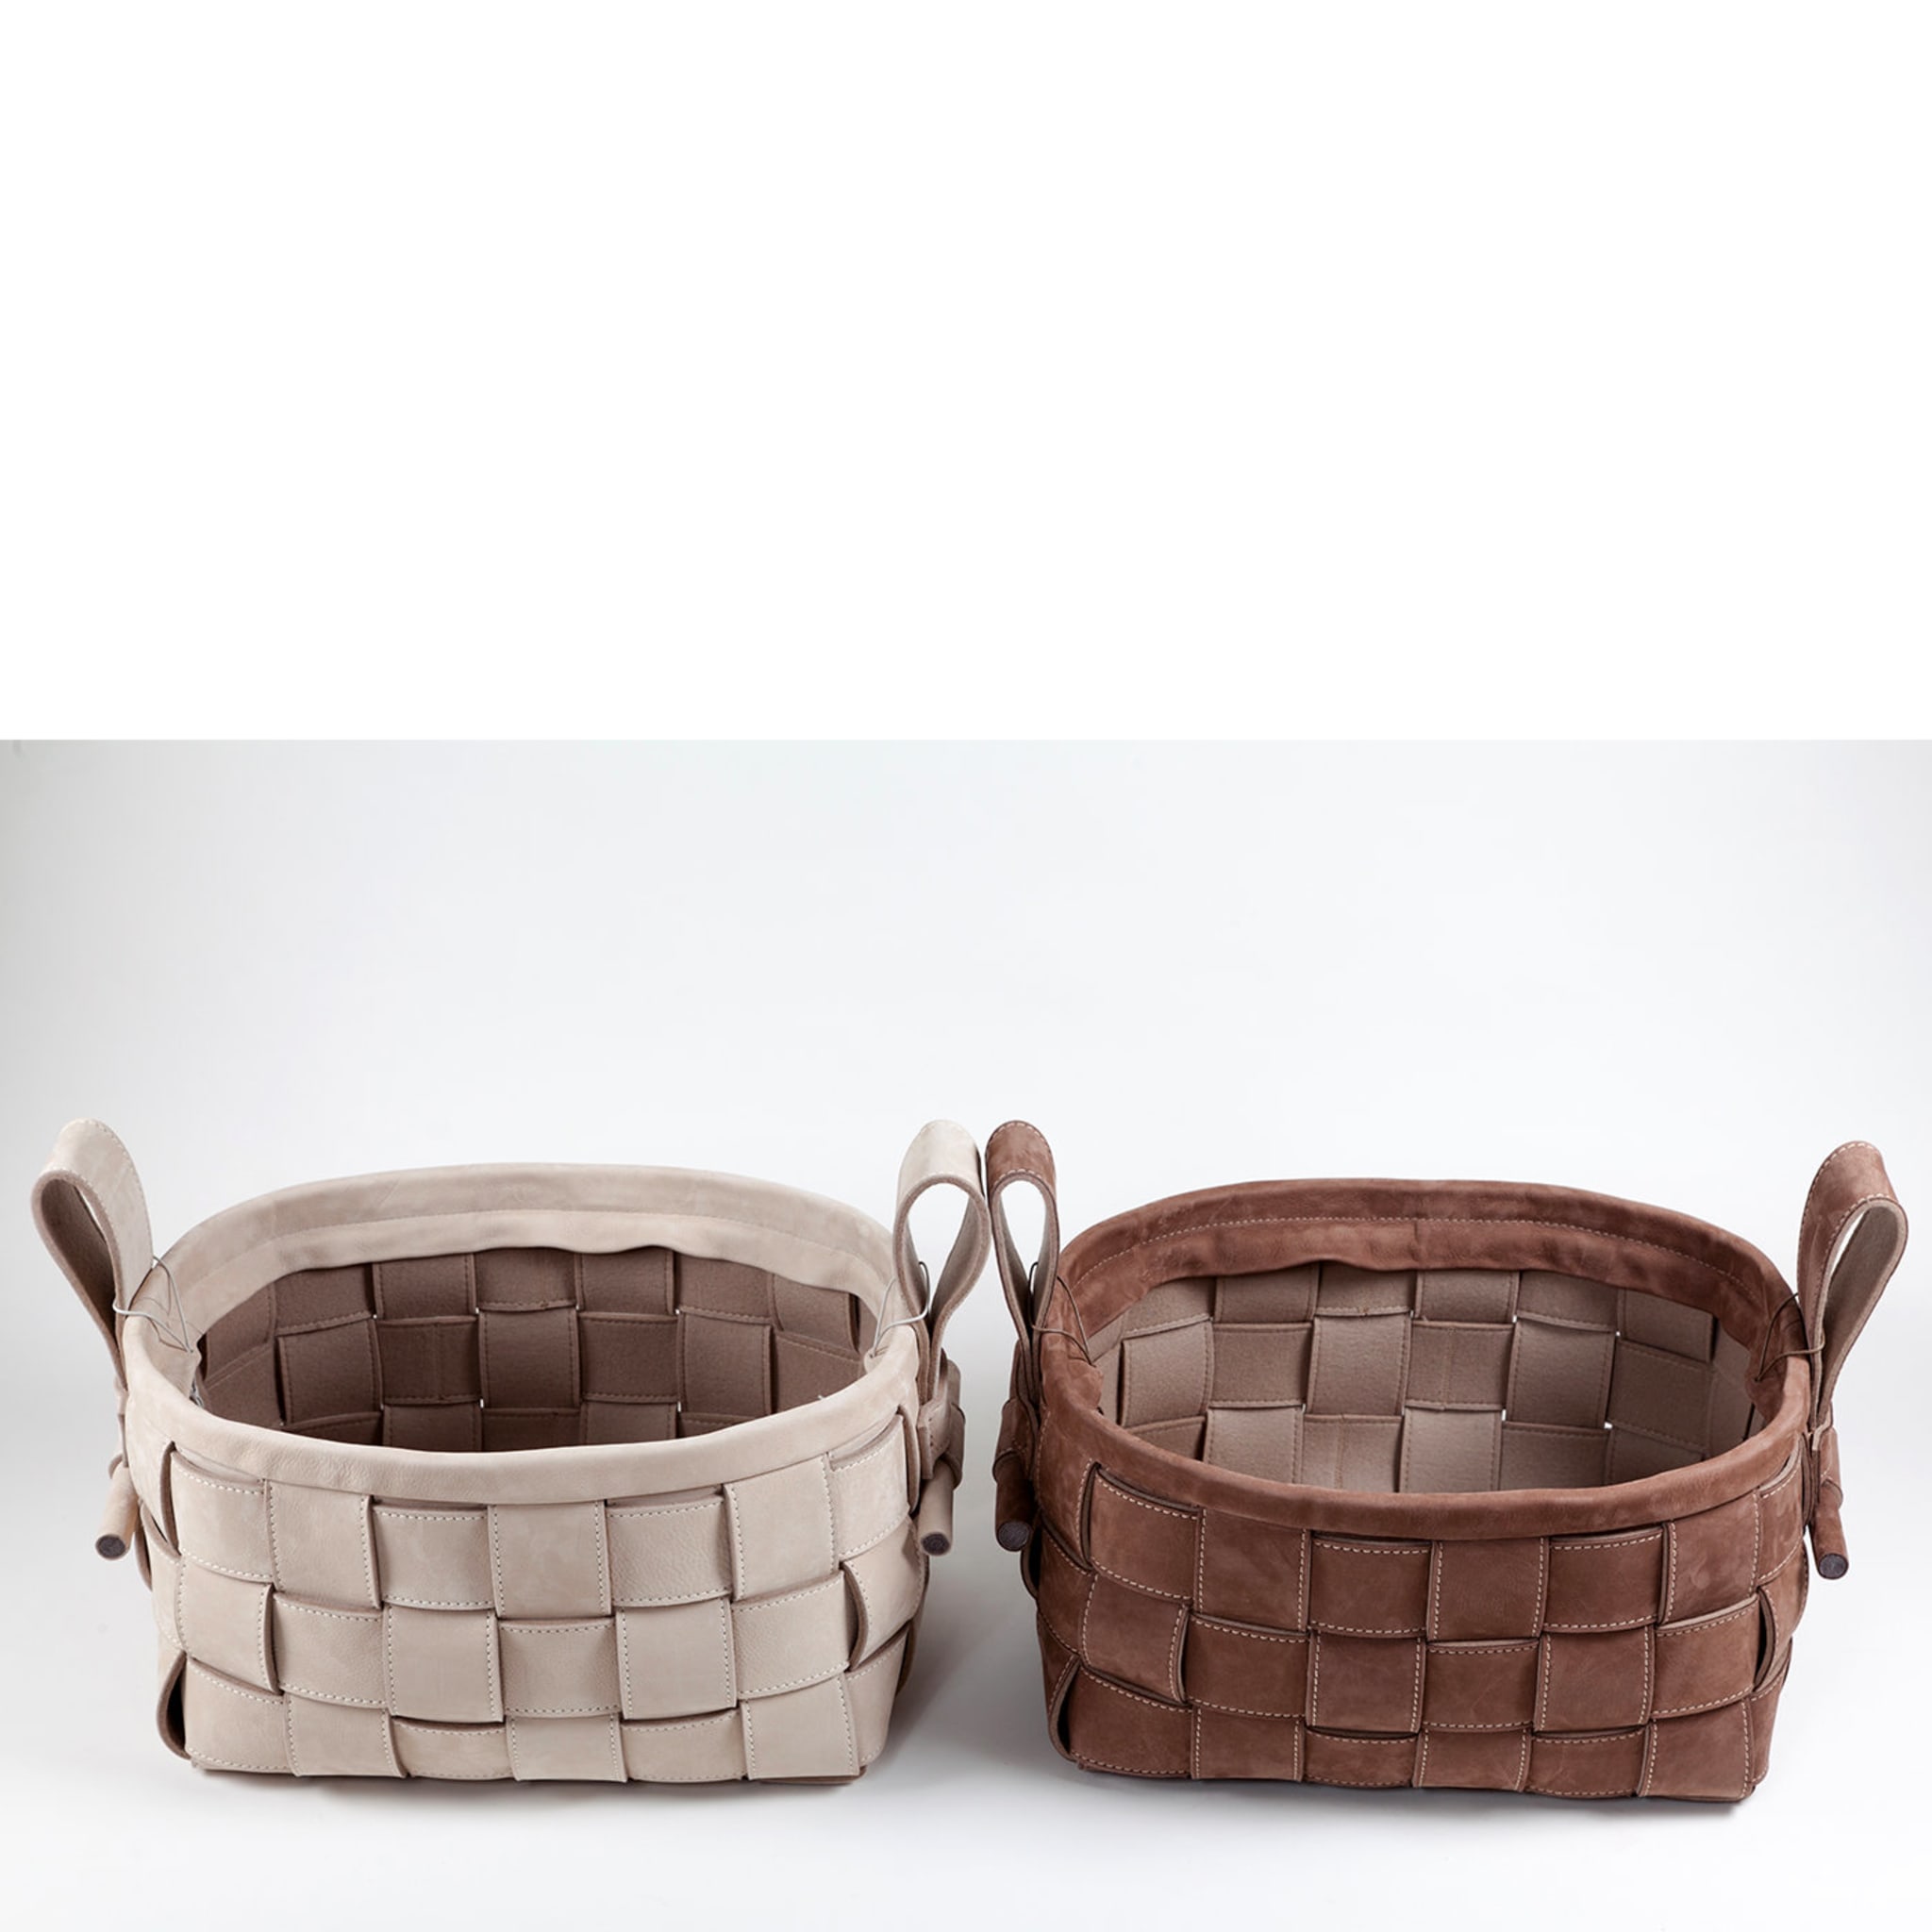 Woven Leather Basket Brown - Alternative view 2